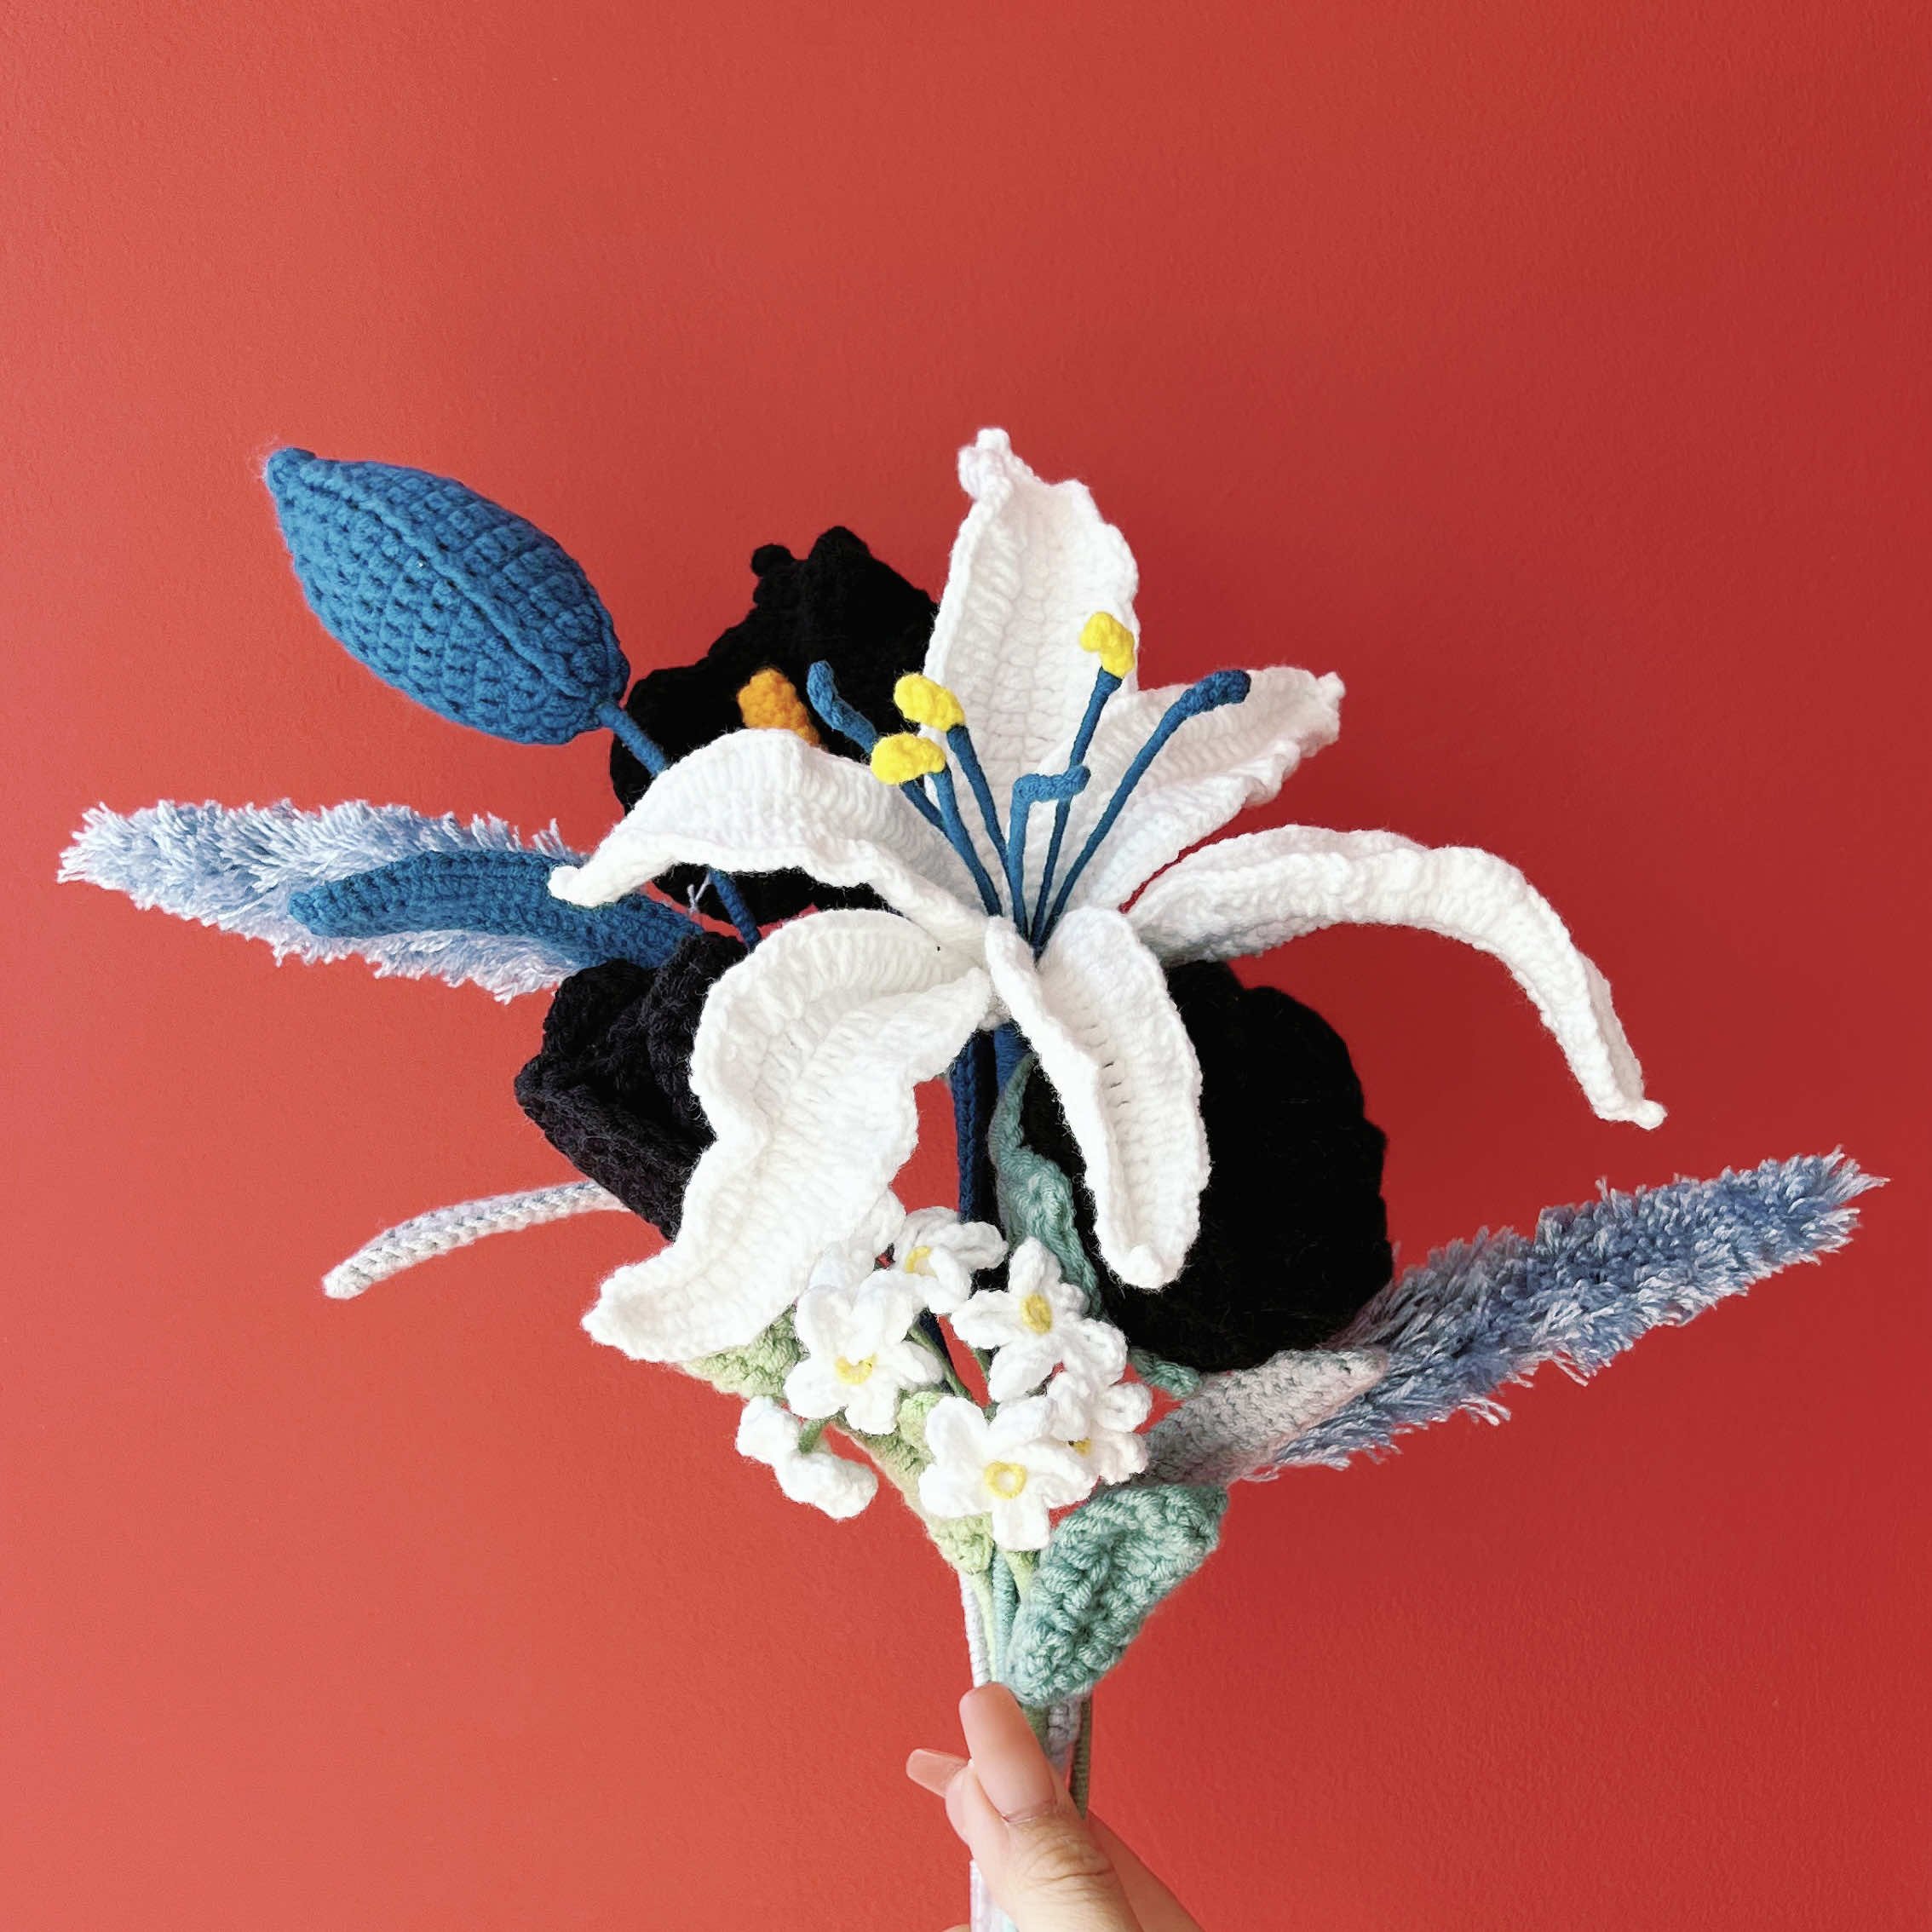 crochet bouquet of blue lily and black tulips.jpg